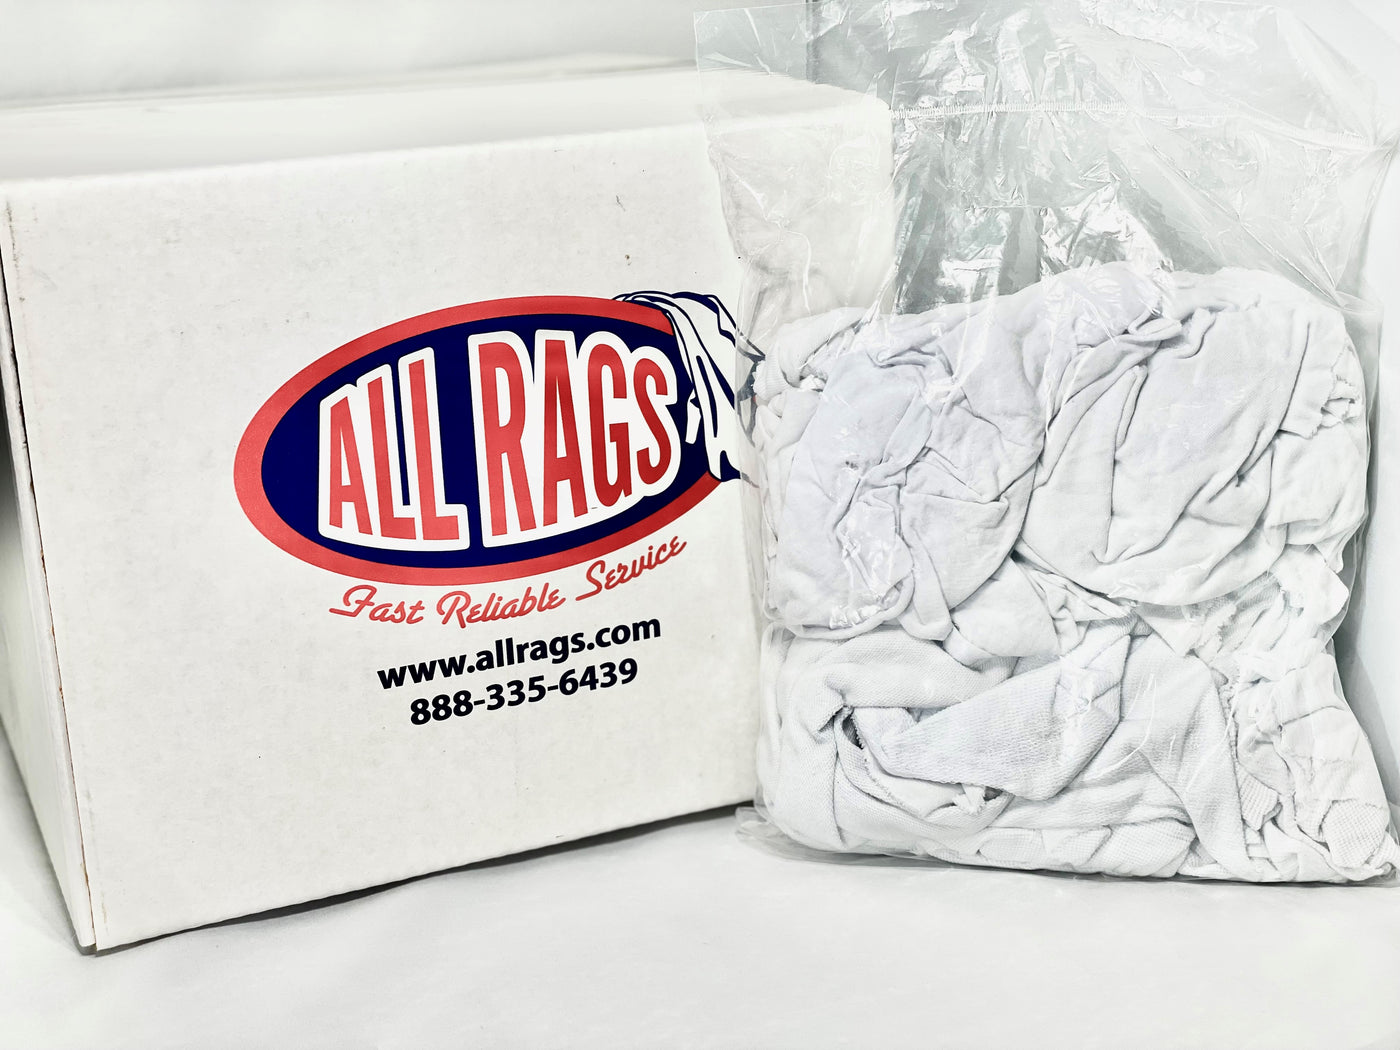 Cleaning Rags - 50 lb. Box